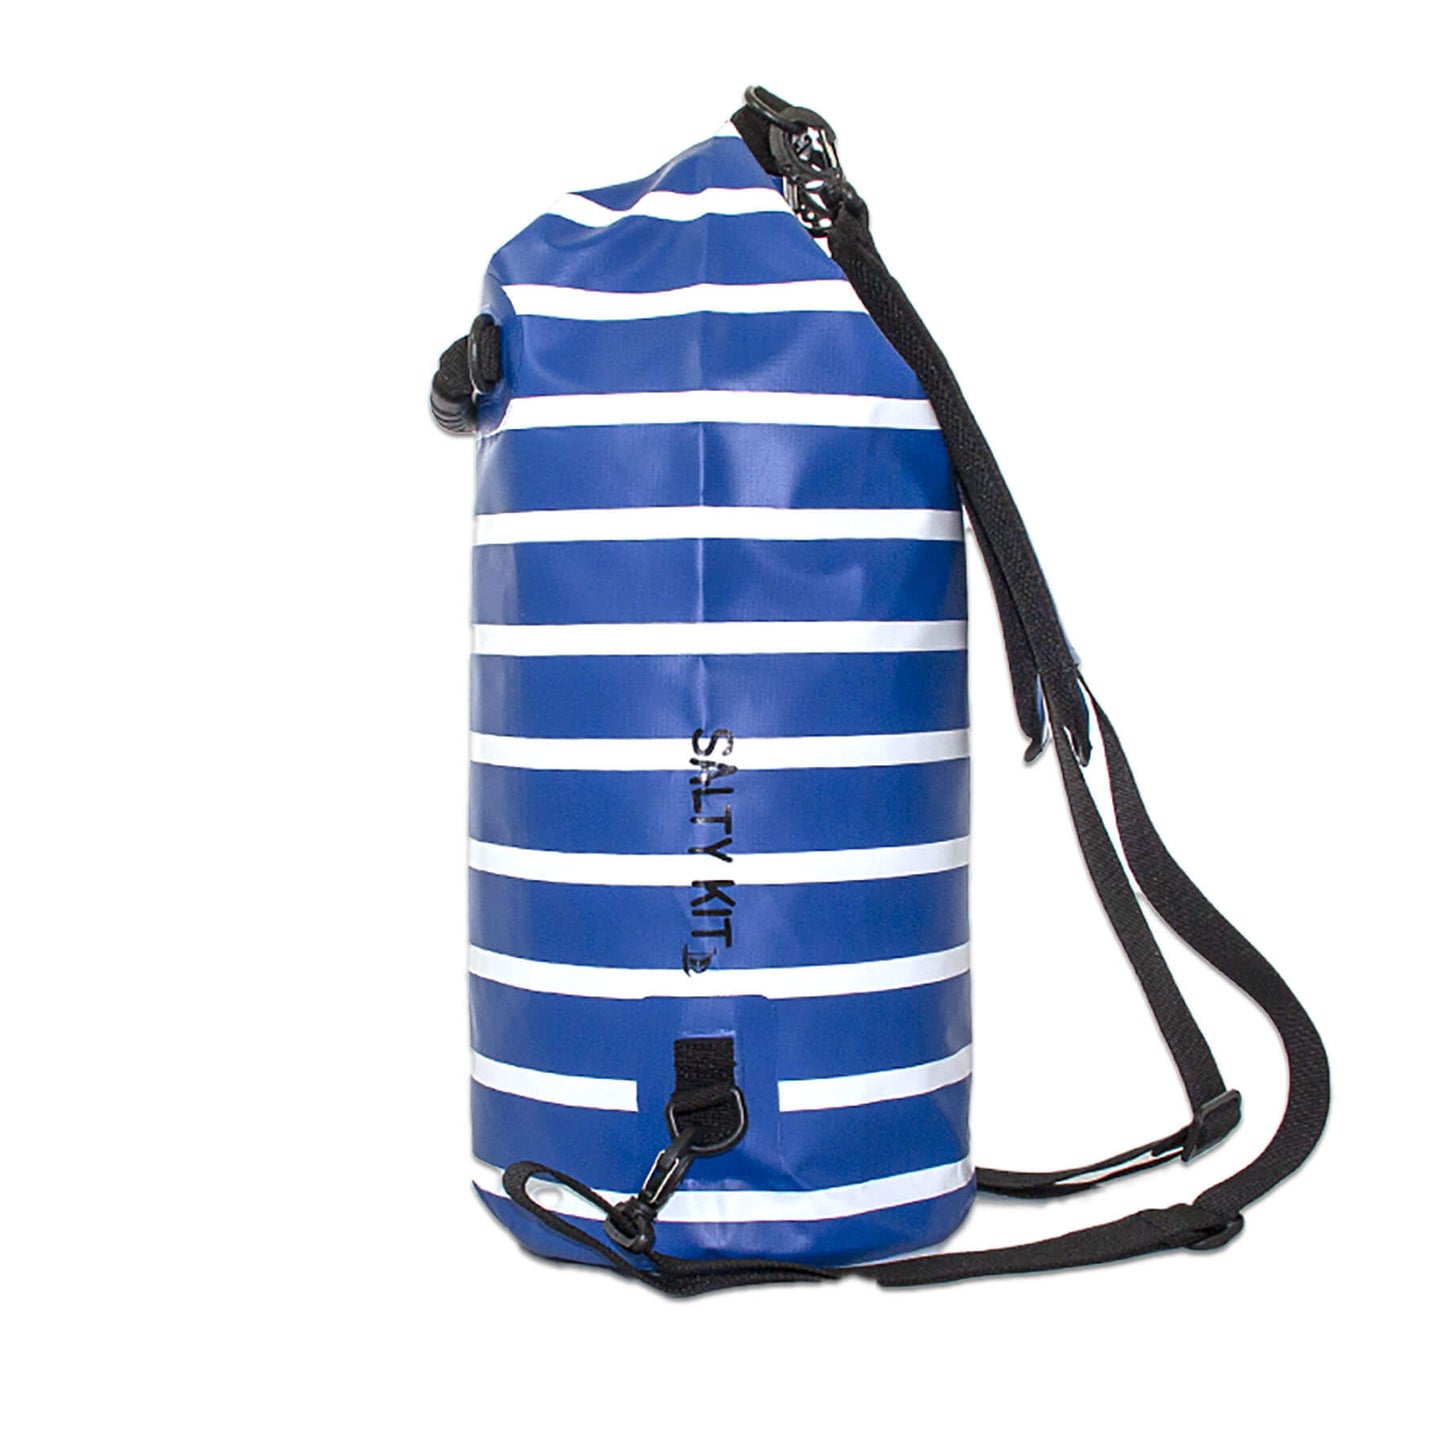 waterproof dry bag 20 litres with detachable comfort straps, D rings and handle in blue and white stripe design side view